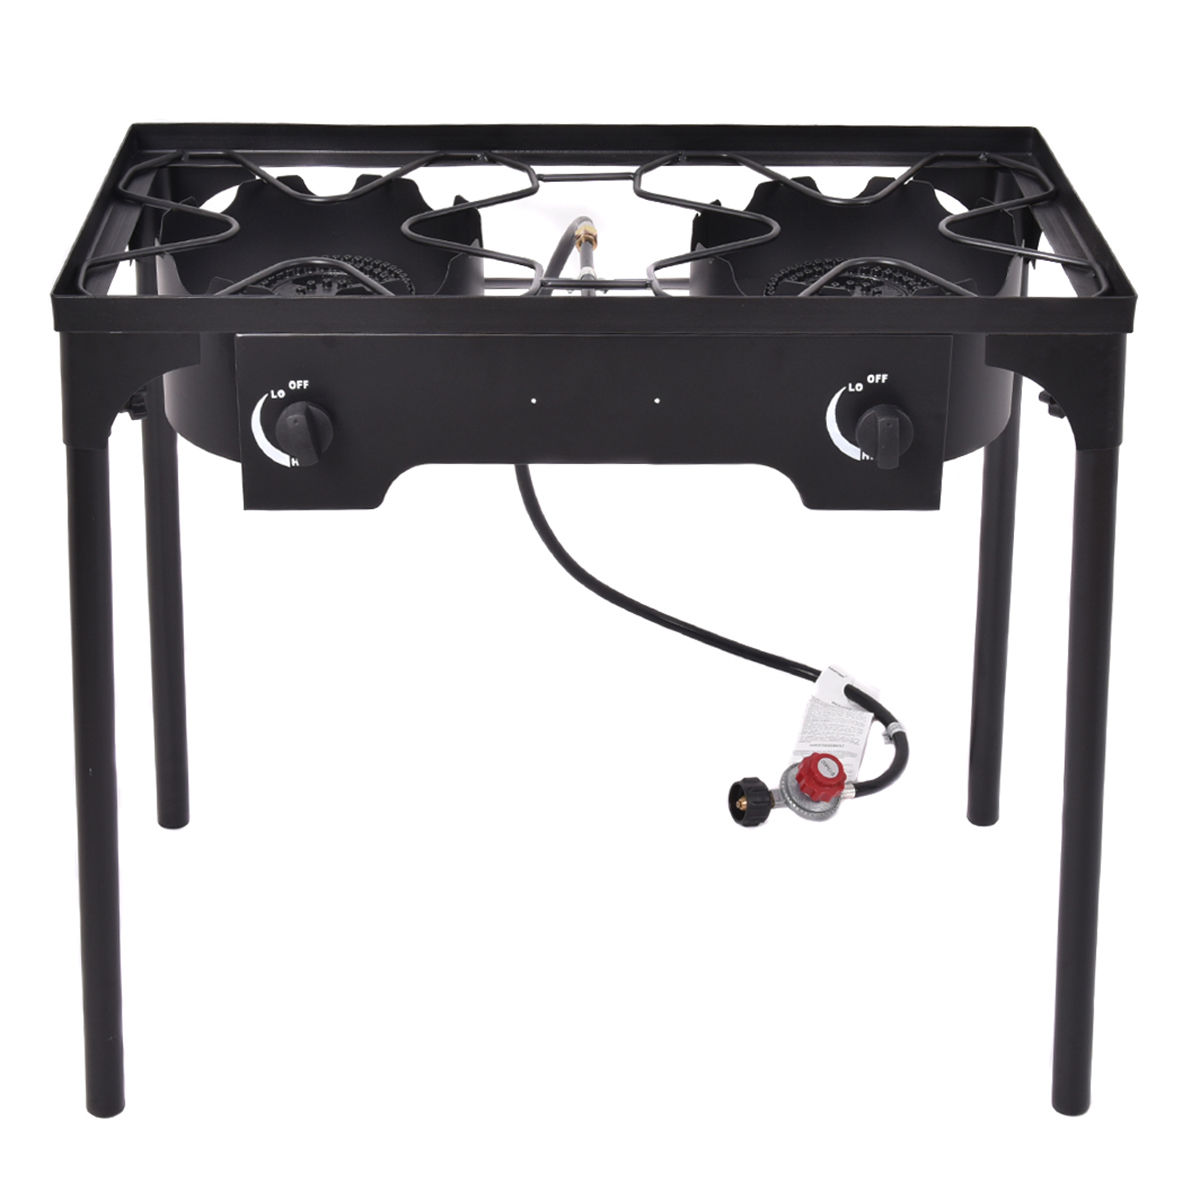 Costway Double Burner Gas Propane Cooker Outdoor Picnic Stove Stand BBQ Grill - image 4 of 10